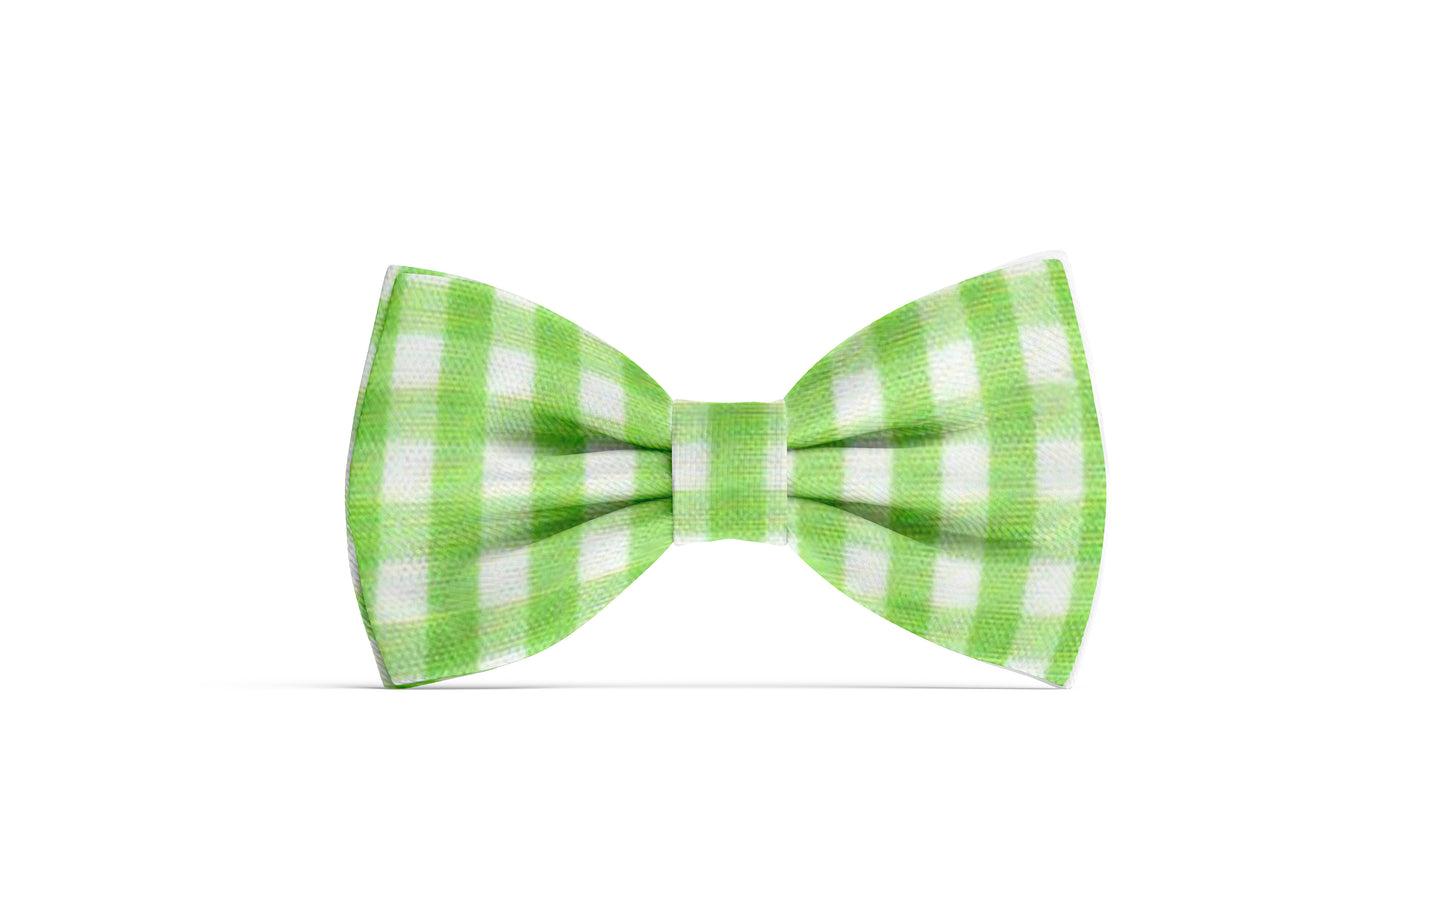 Dog Bow Tie - Lime Green Gingham